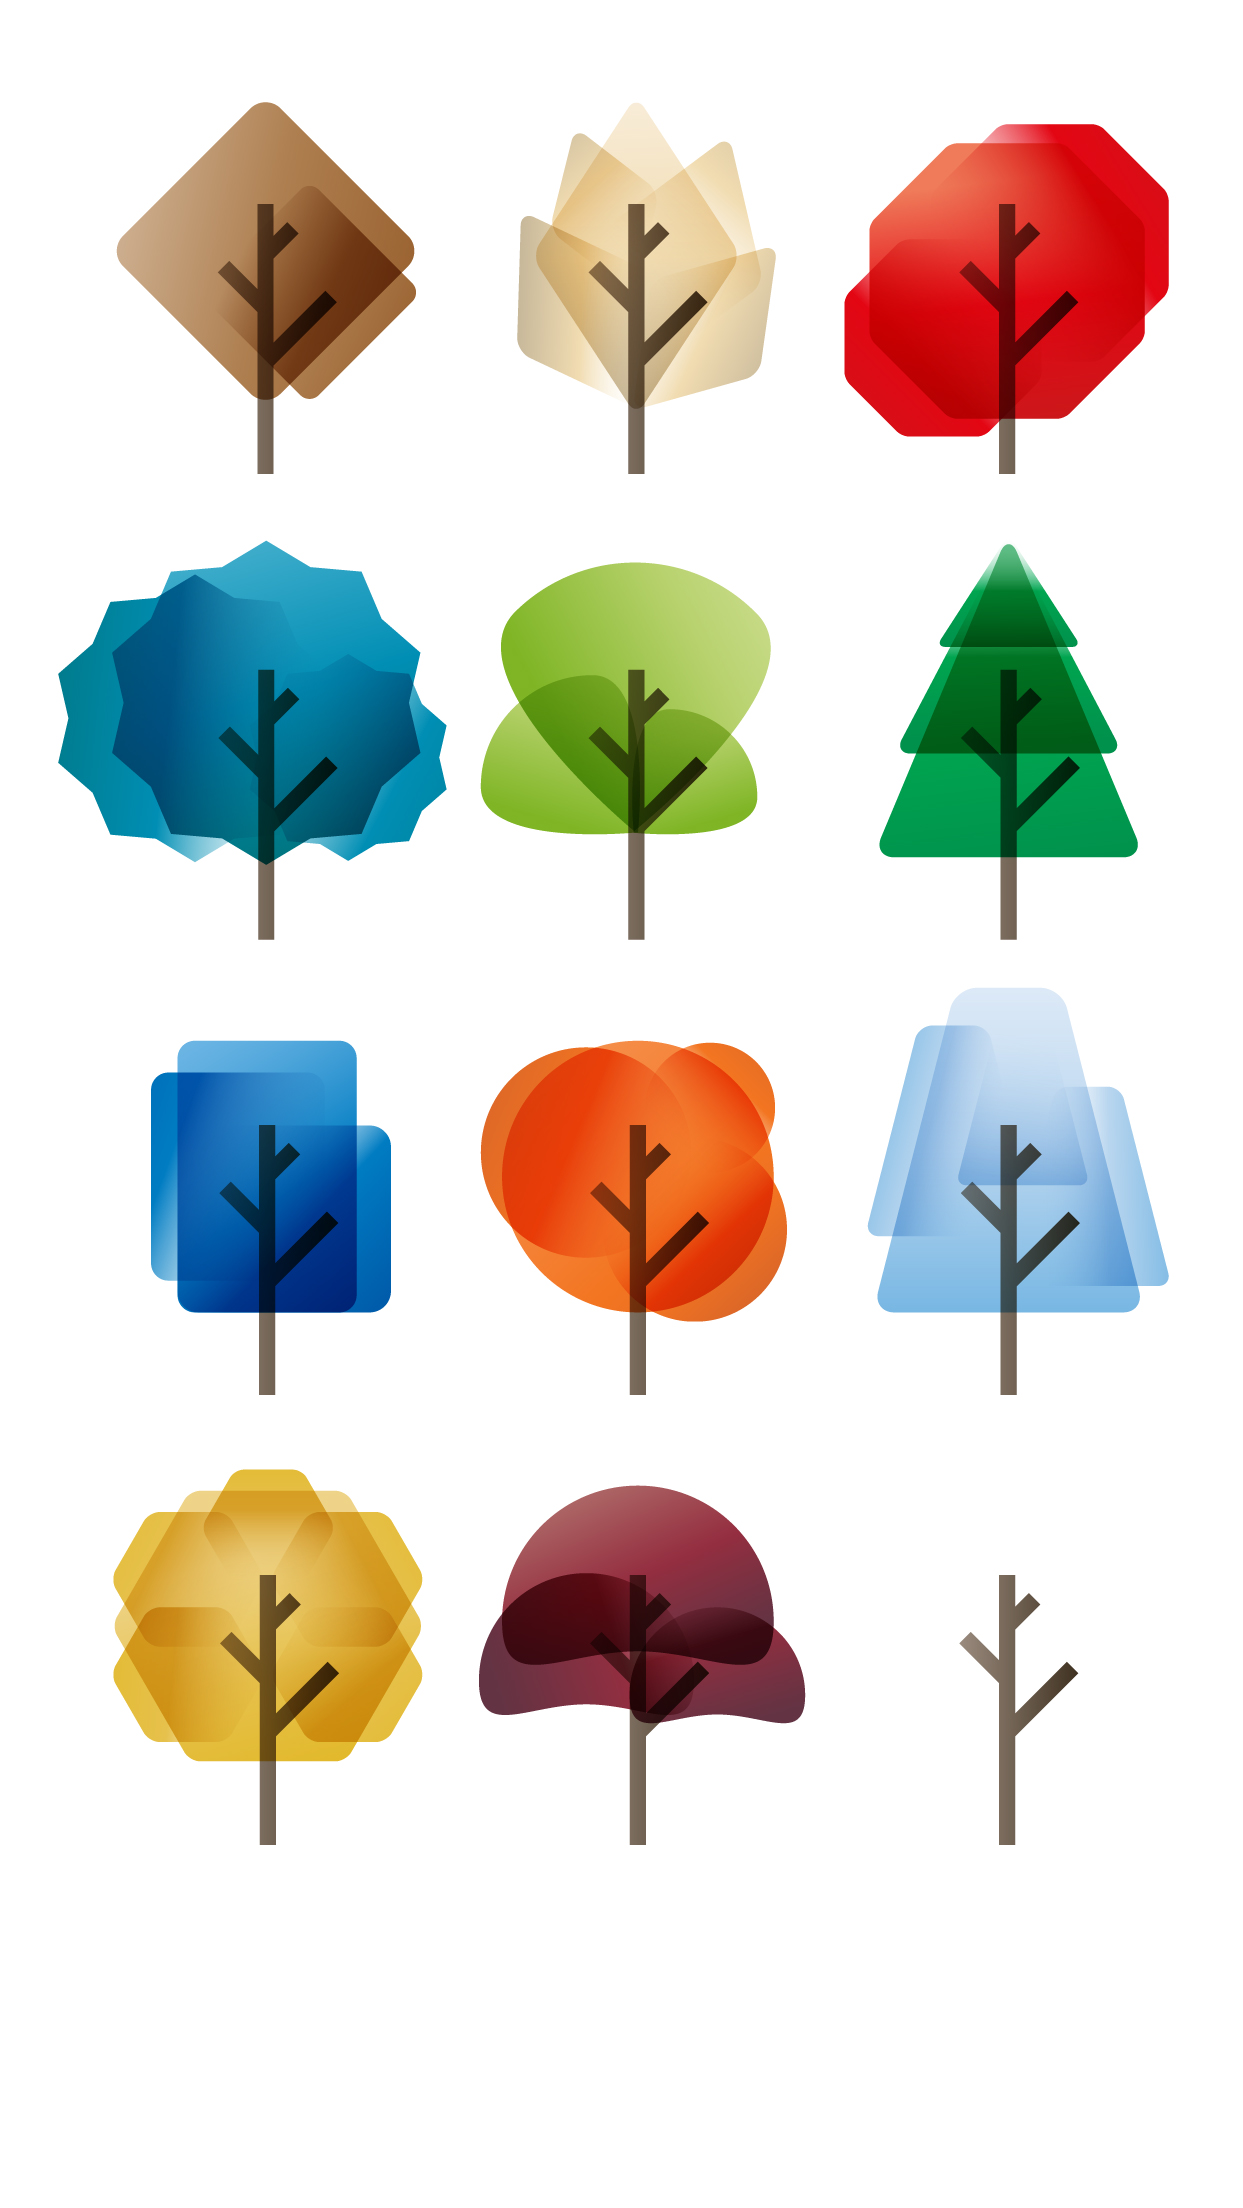 Twelve icons representing trees during all the four seasons of the year, illustration by Francesco Faggiano illustrator